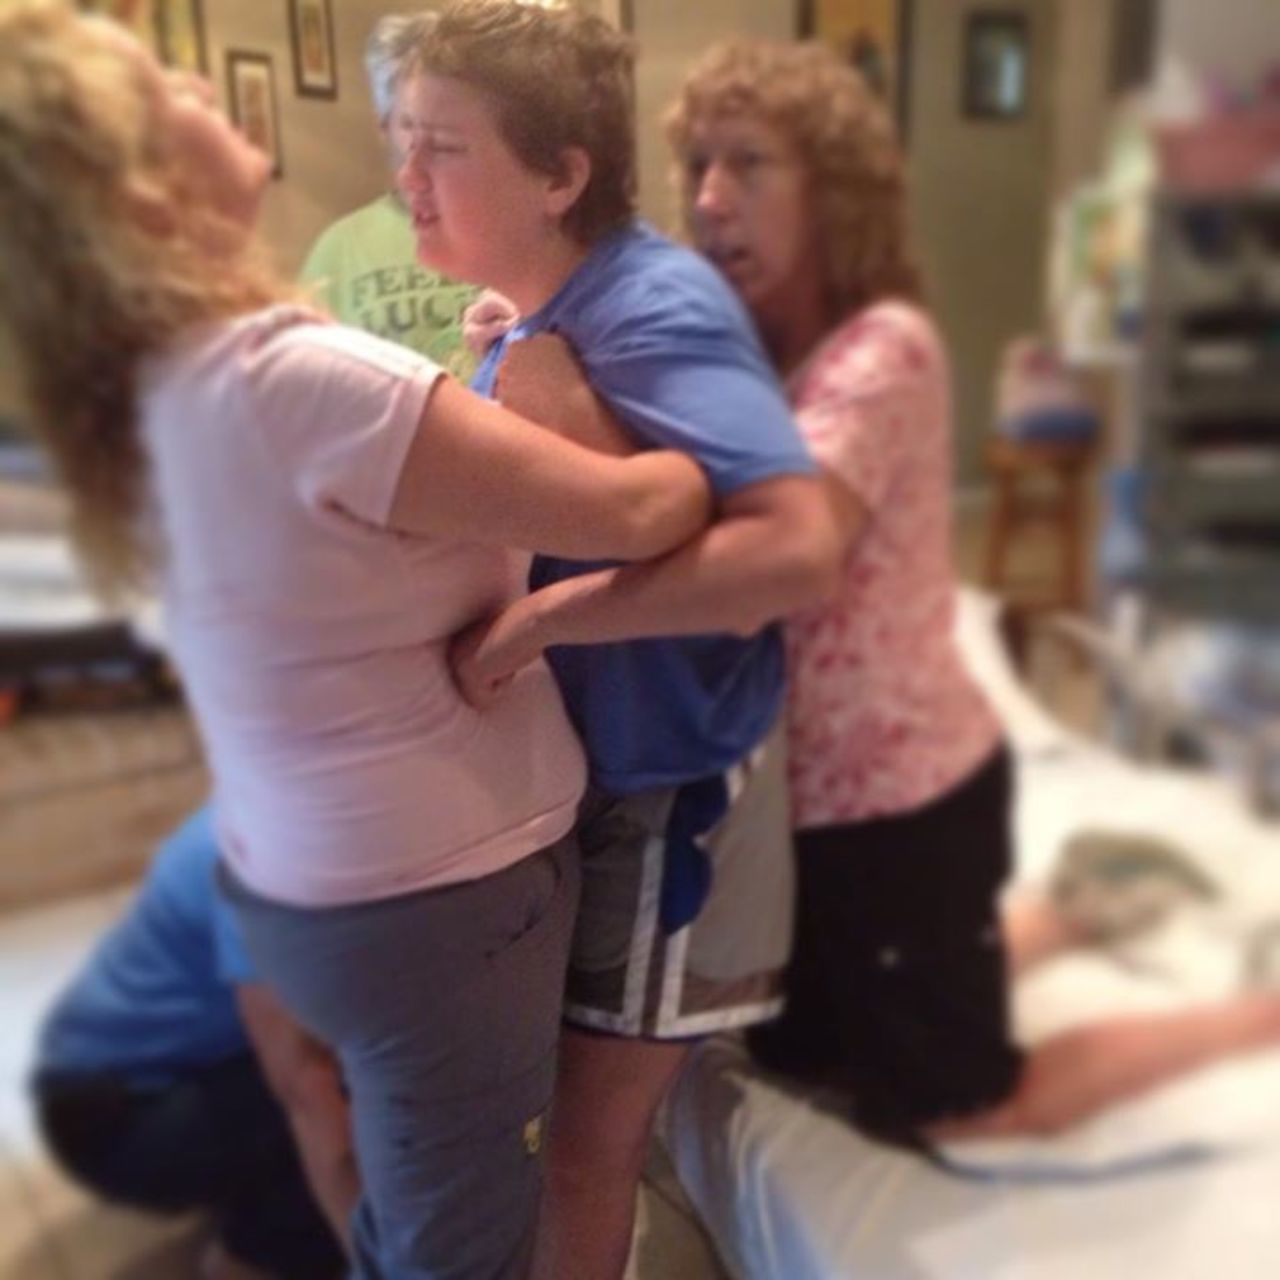 Emily struggles to stand with some help on April 26. "Thank you for all your positive comments. It's a new day and I'm much ... happier today than I was yesterday," she told her mother to share on Facebook.